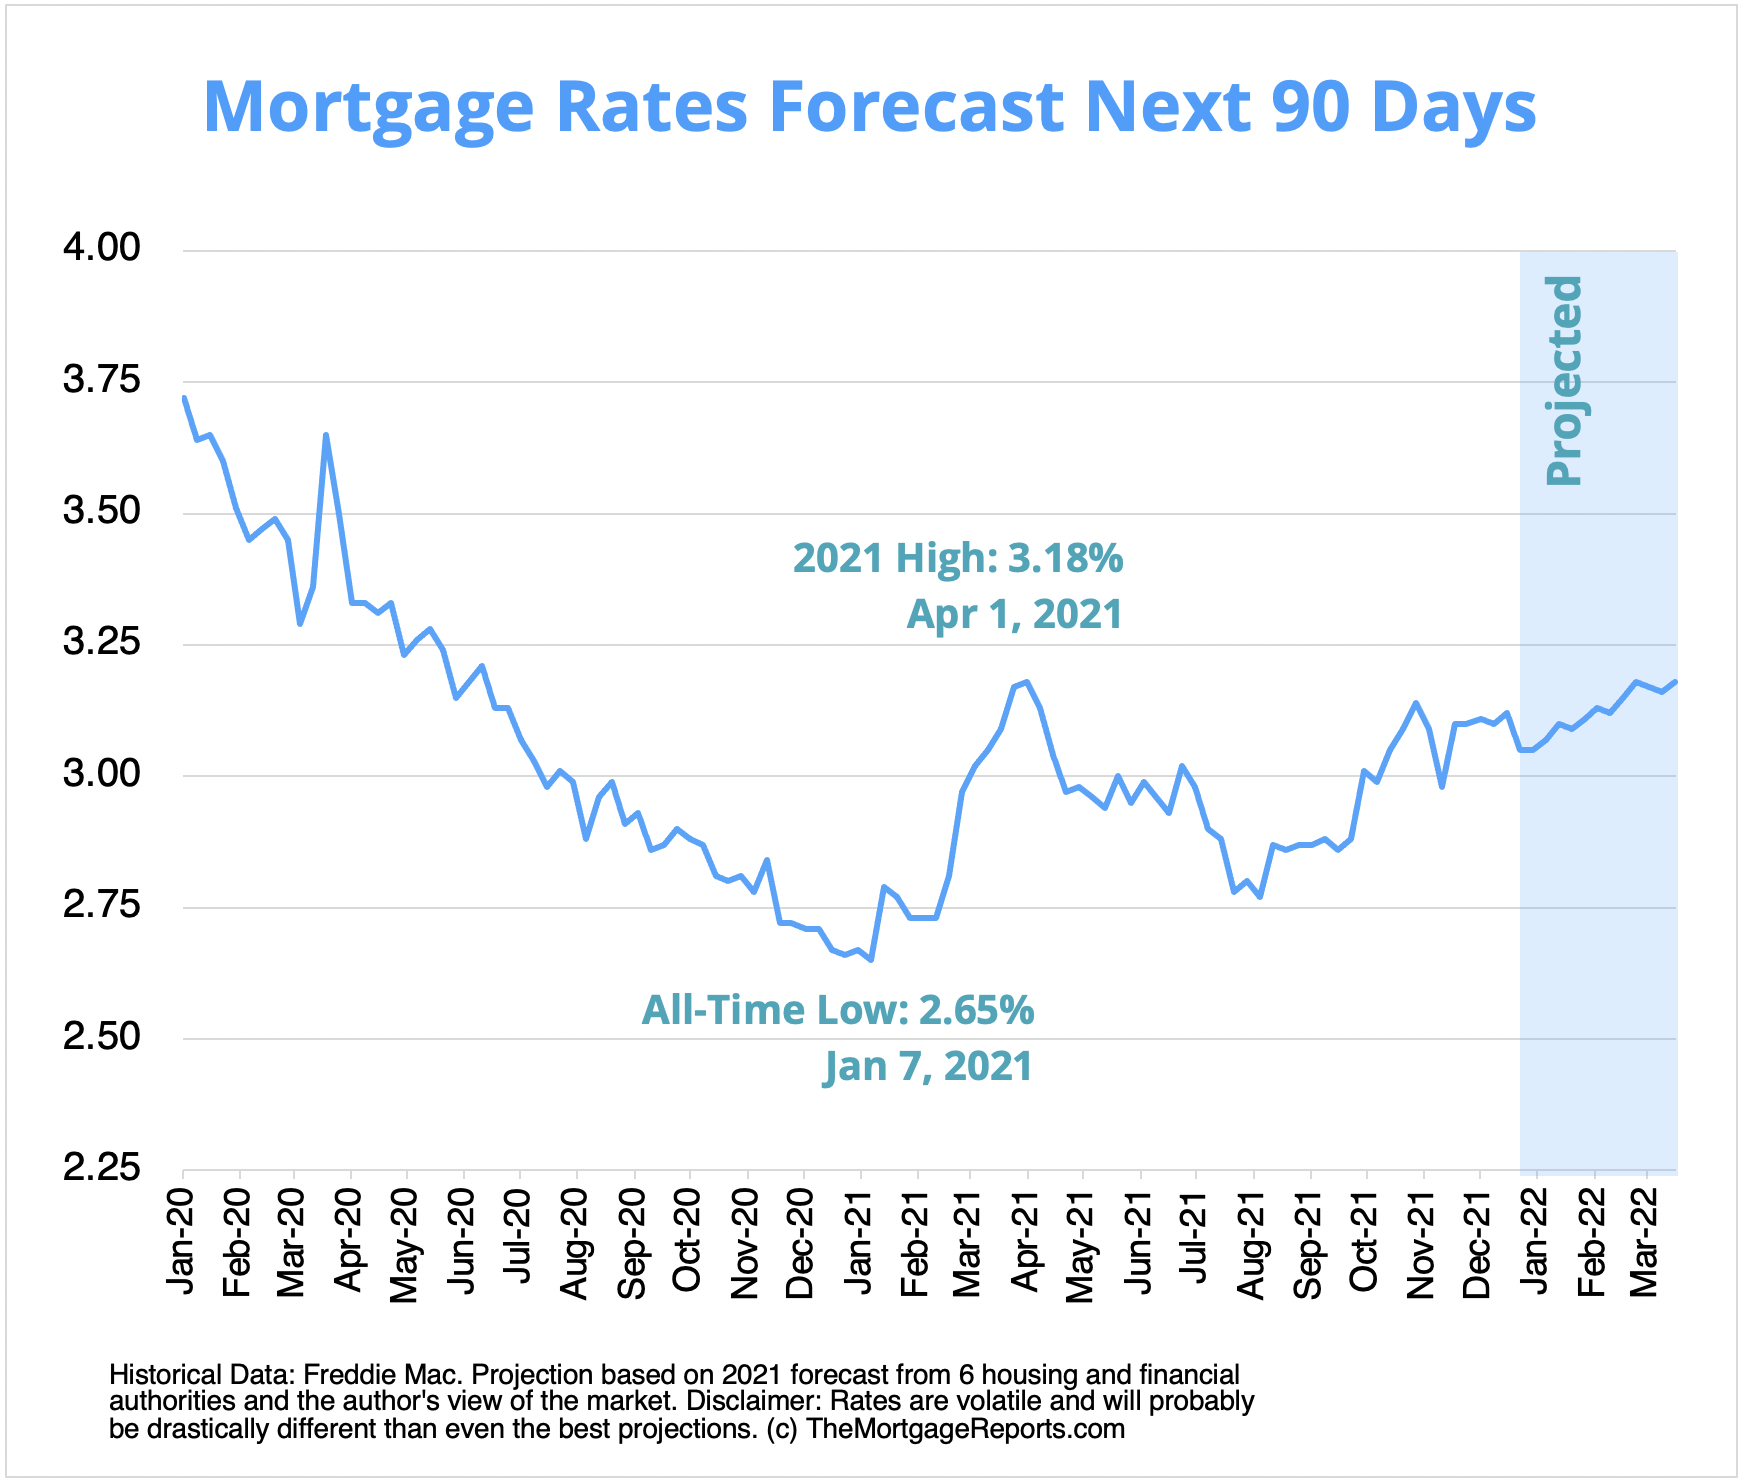 Image of a mortgage rate forecast chart showing rates going as high as 3.18% by March 2022.